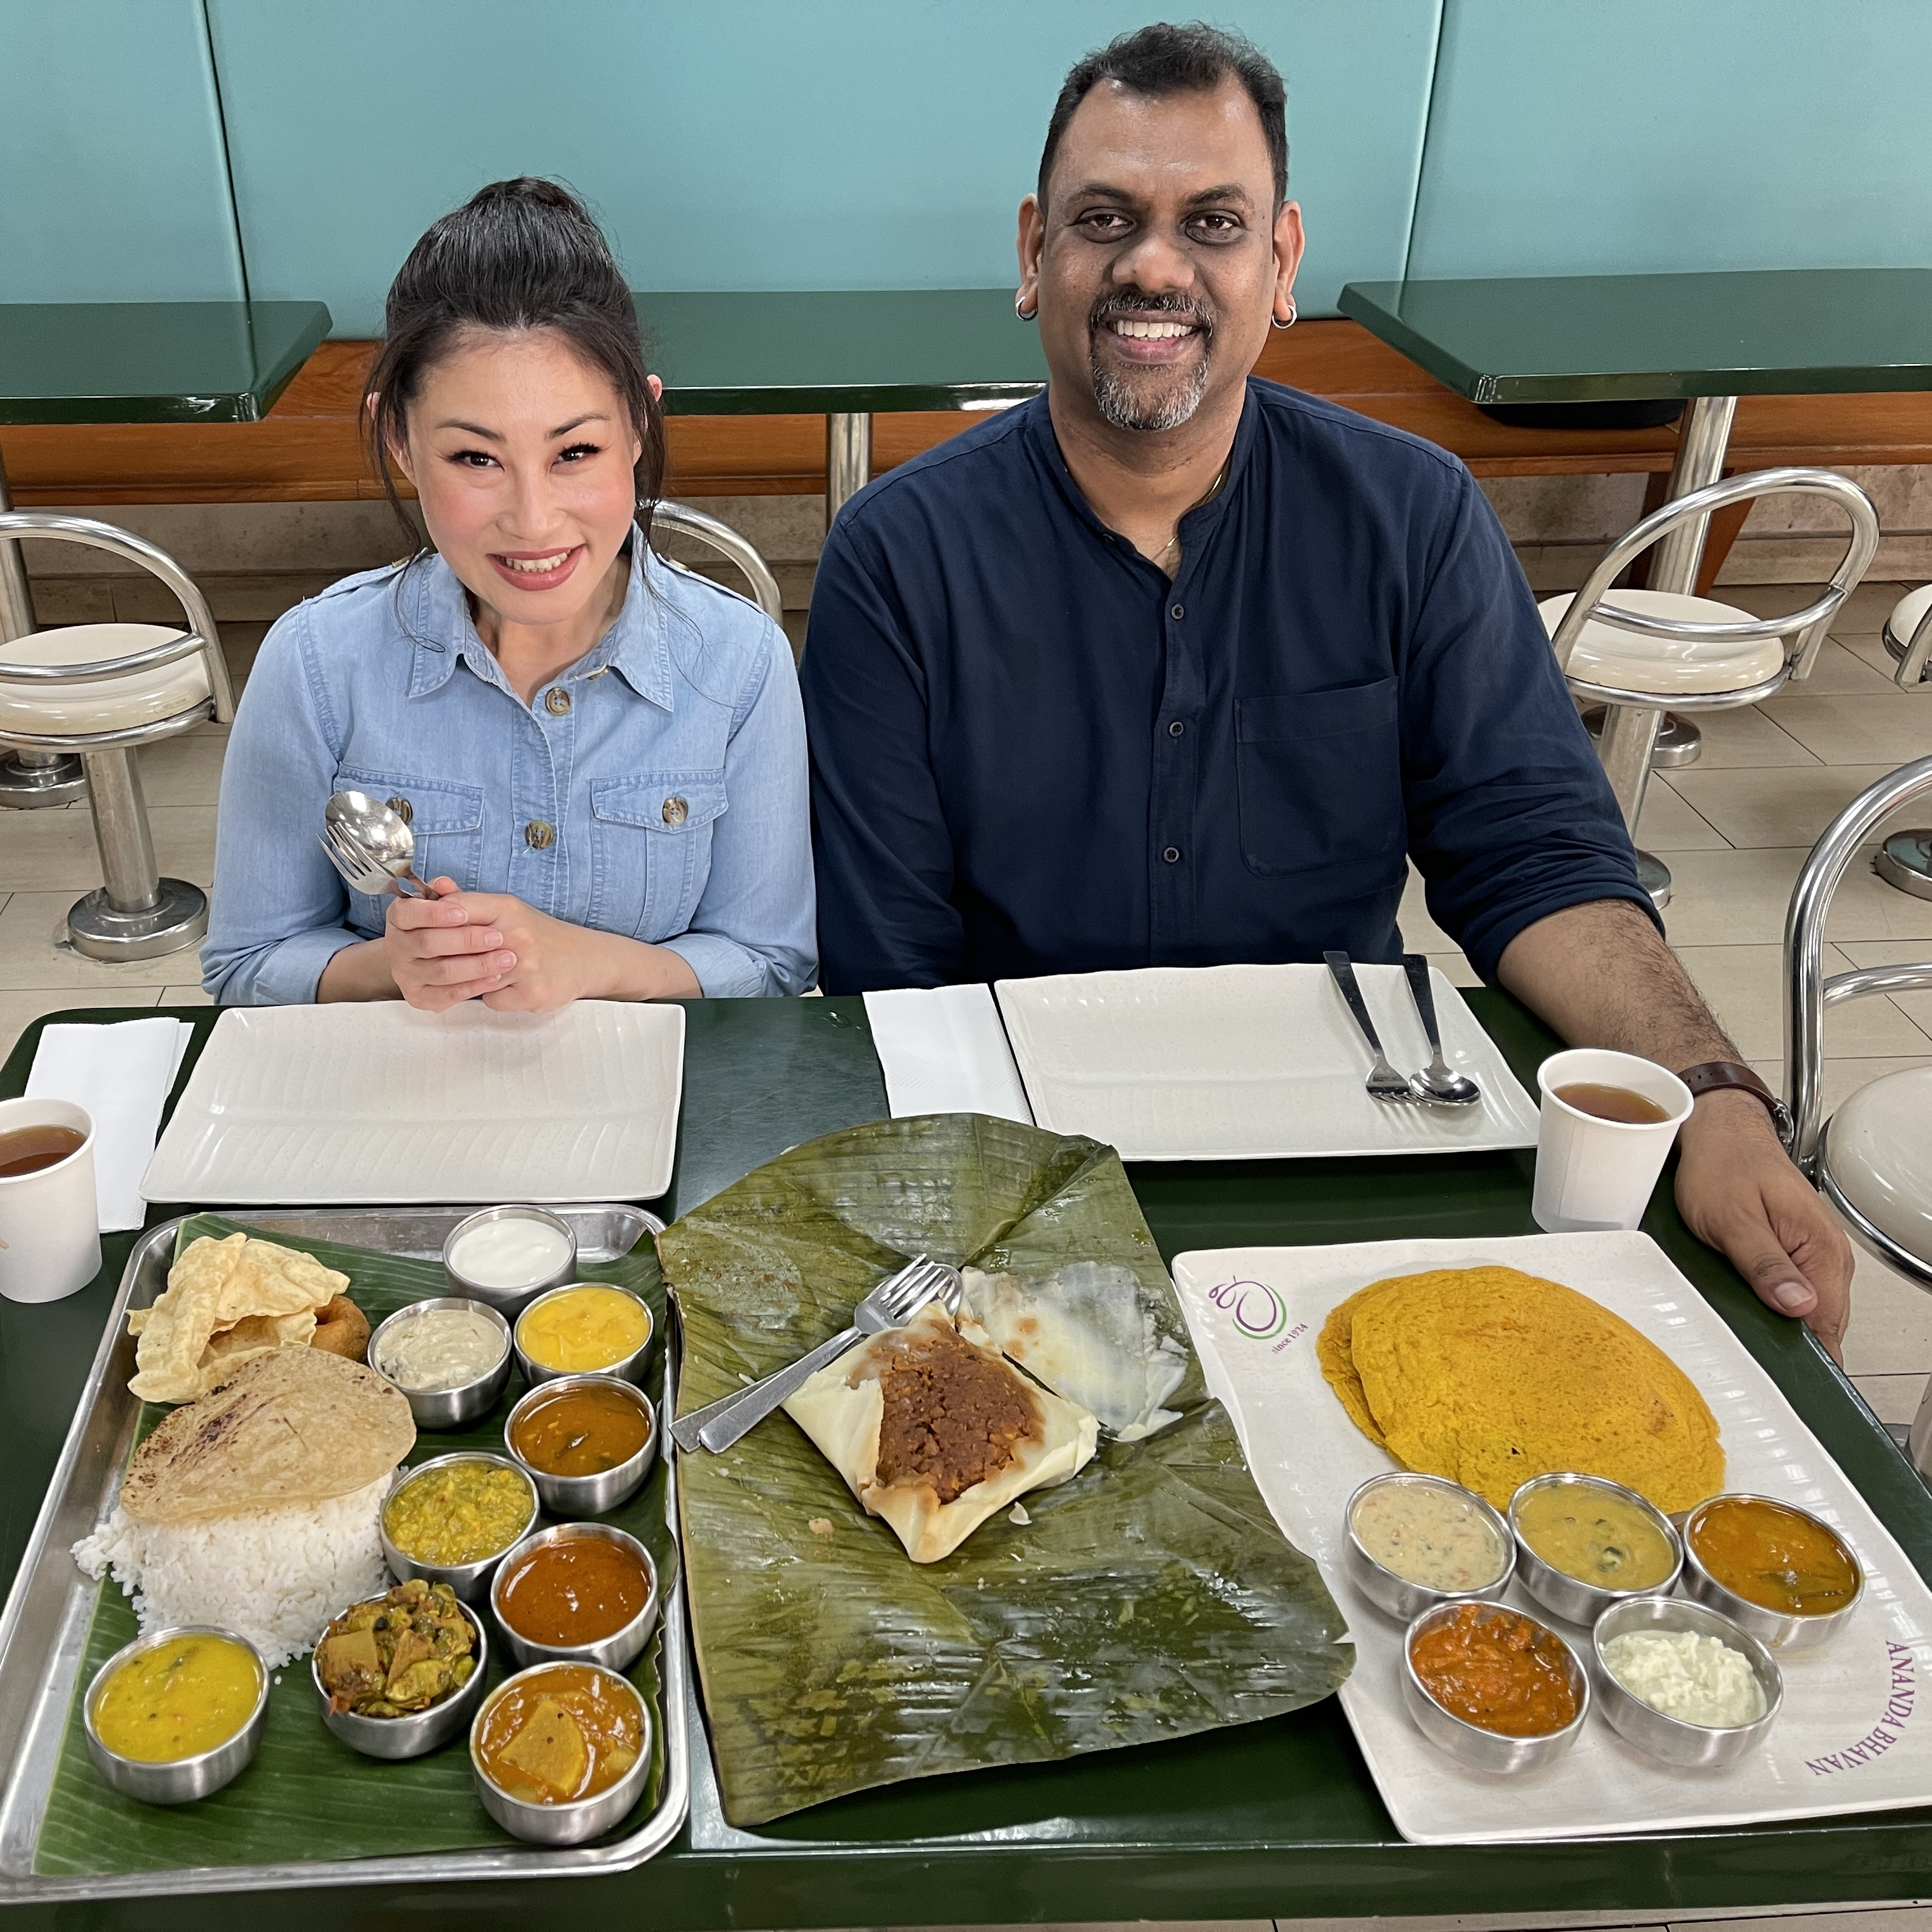 S'PORE HERITAGE:  INDIAN VEGETARIAN MEALS WITH A TWIST AT A 100-YEAR-OLD INSTITUTION